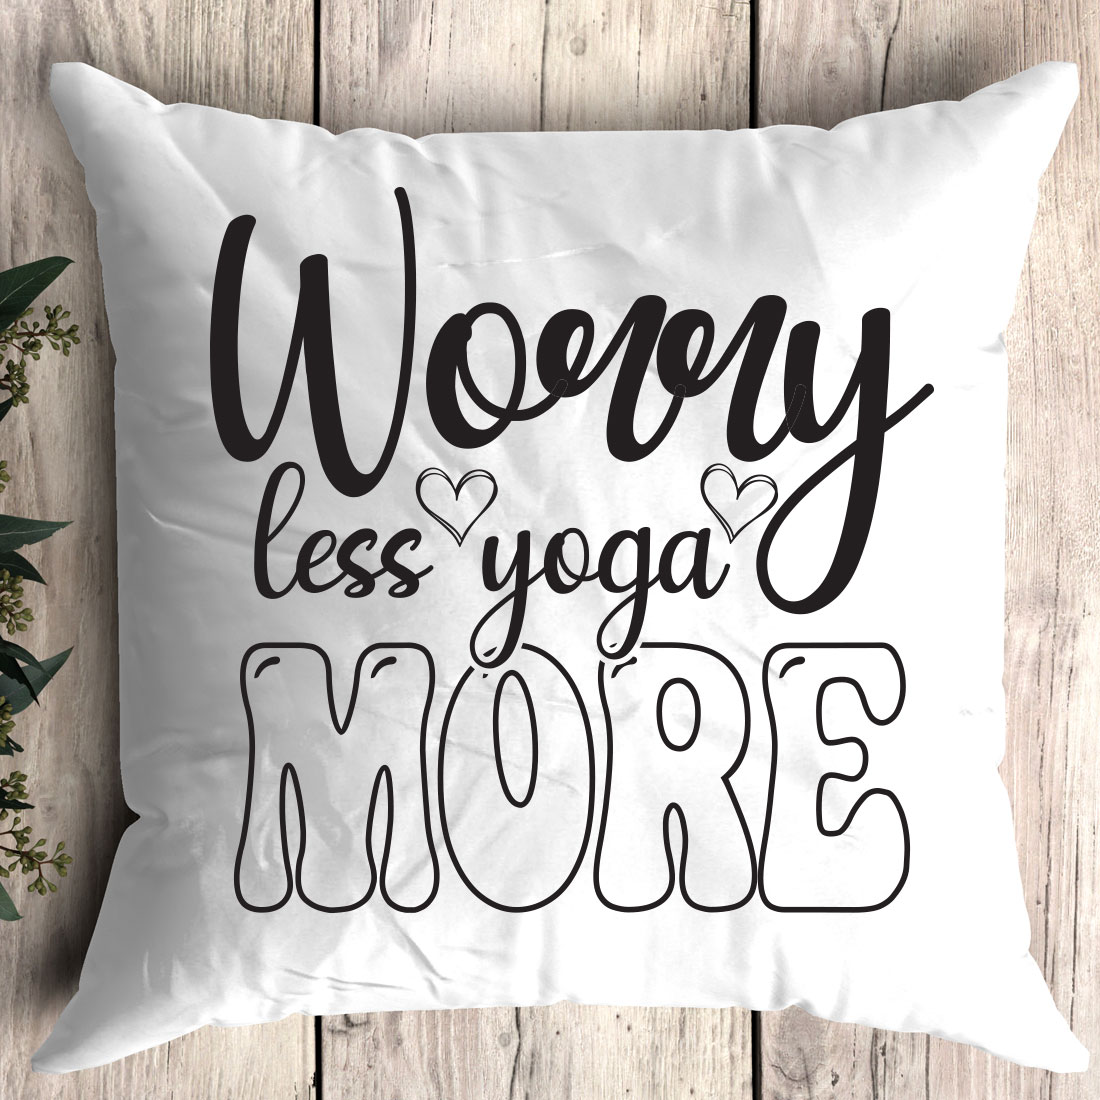 Pillow that says worry less yoga more.